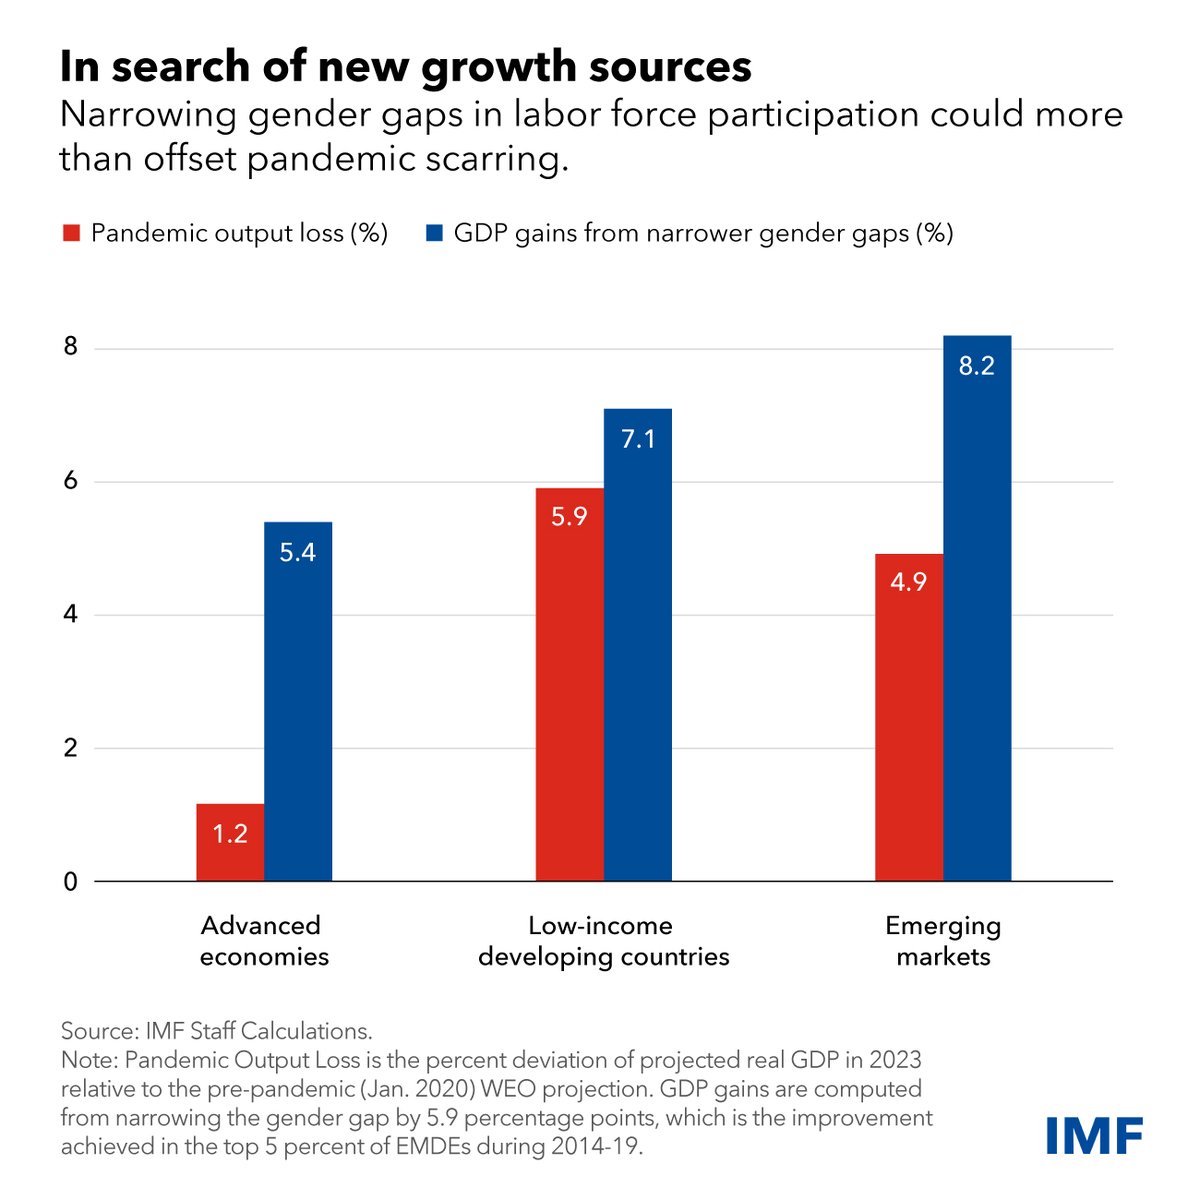 Narrowing the gap between the share of men and women who work is one of the very important reforms policymakers can make to revive economies amid the weakest medium-term growth outlook in more than three decades. imf.org/en/Blogs/Artic…